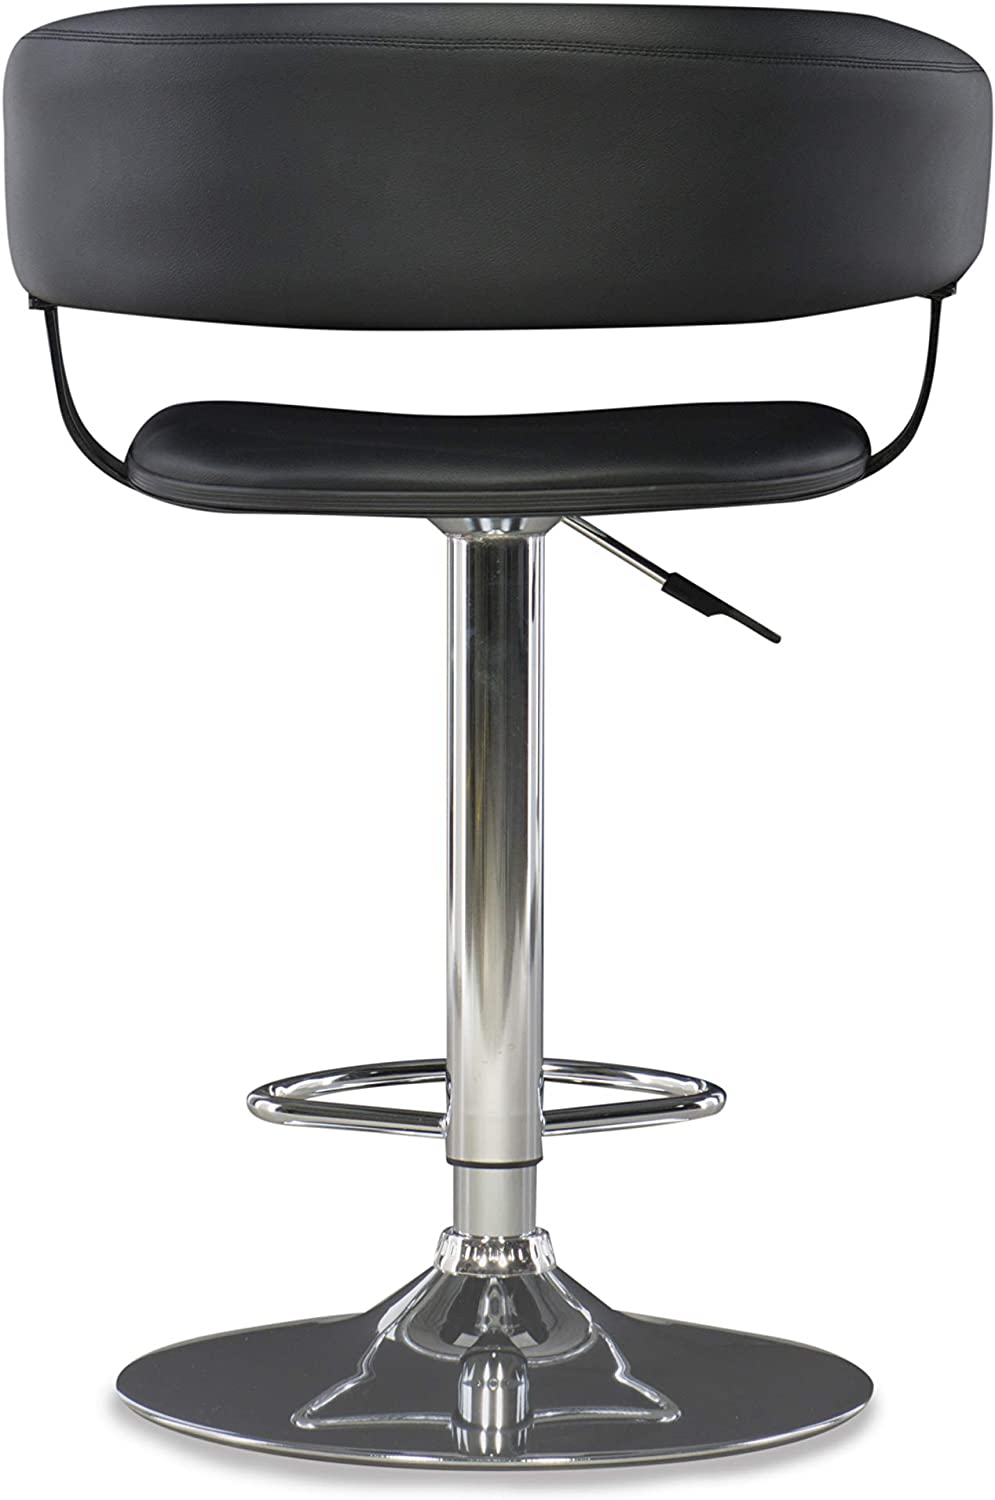 Powell Furniture Black Faux Leather Barrel and Chrome Adjustable Height Bar Stool